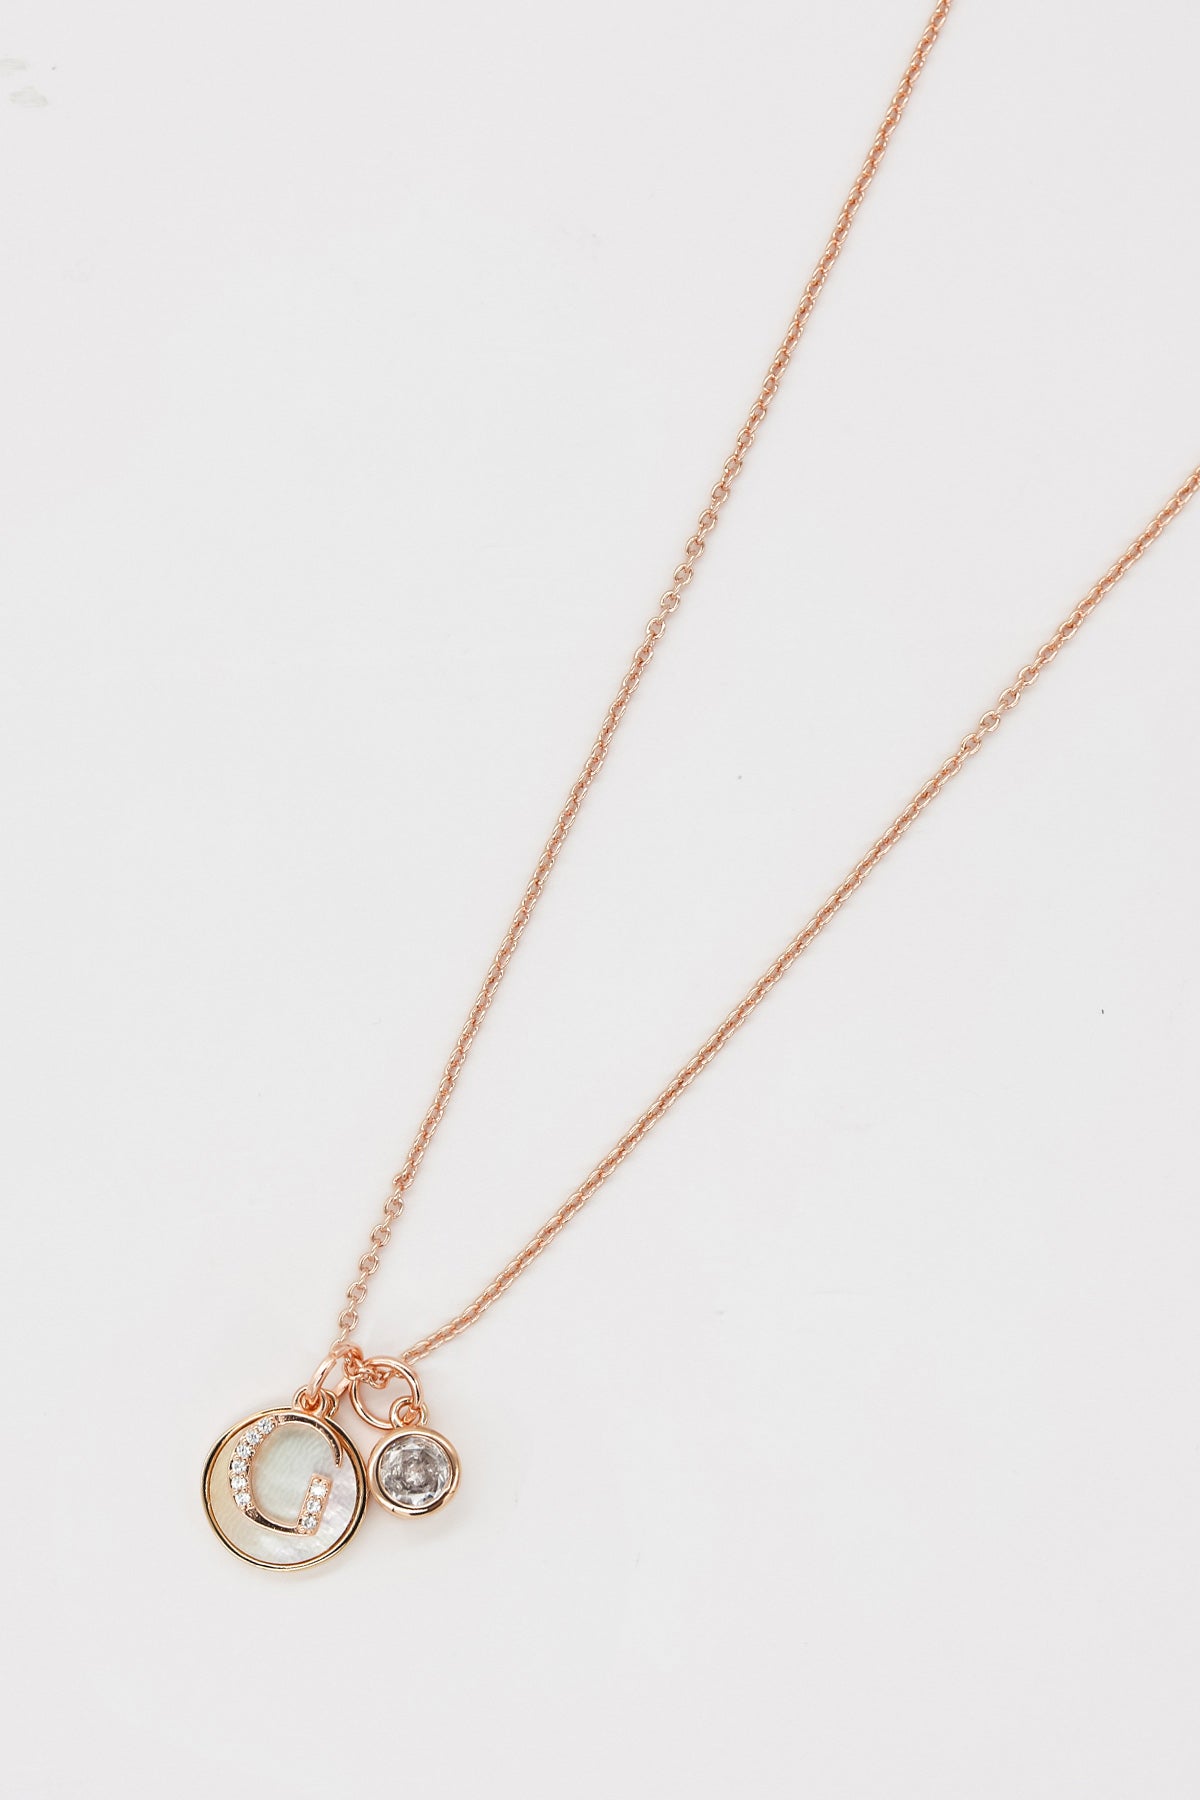 Buy Letter G Initial Necklace Small Circle Necklace initial Necklace for  Women dainty Necklace initial Necklace for Mom Copper Jewelry Online in  India - Etsy